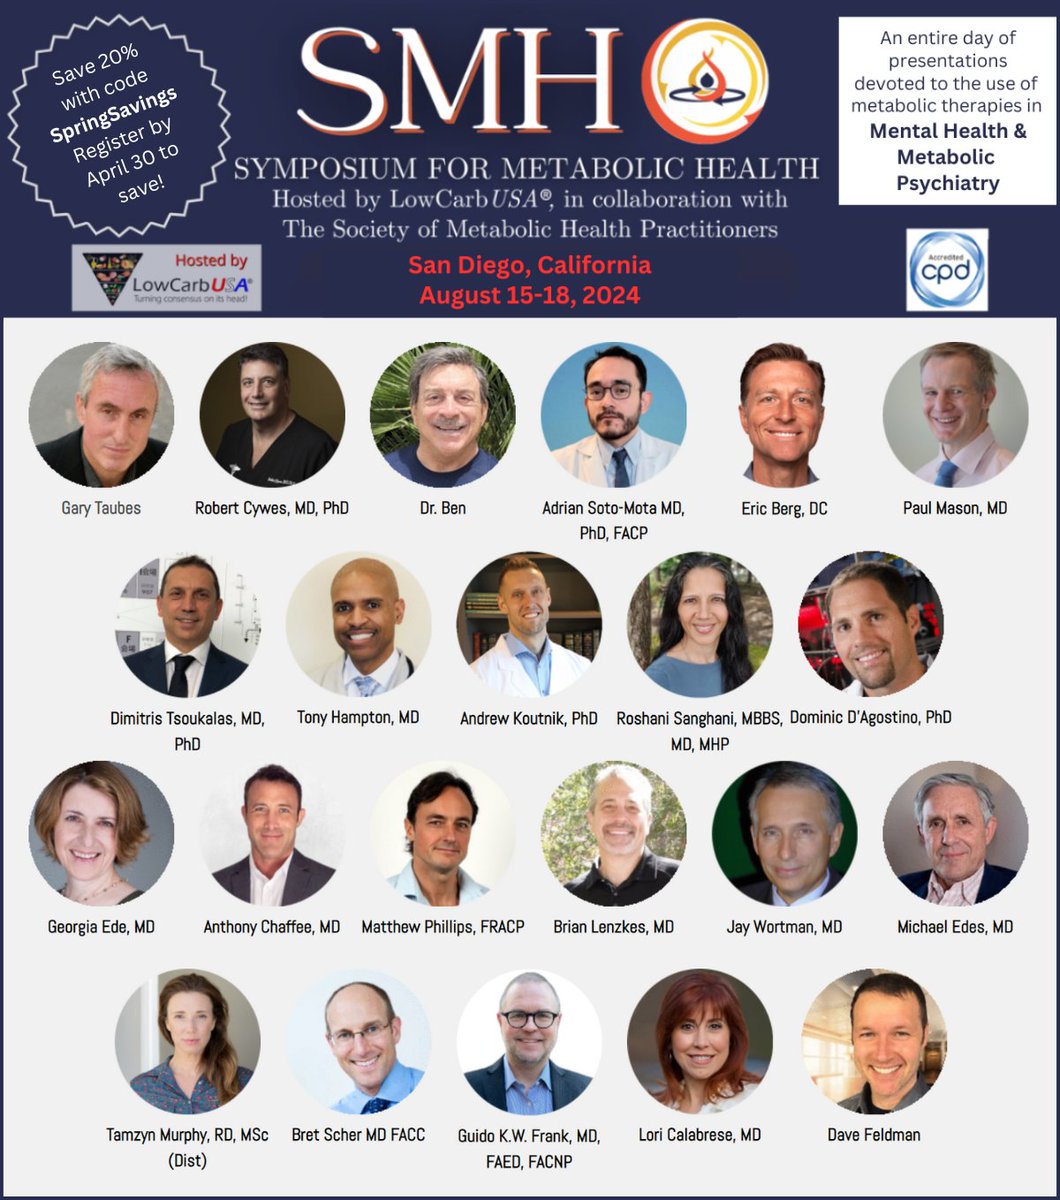 Looking forward to our Symposium for Metabolic Health on Aug 15-18 in San Diego, we are thrilled about the preparations already underway. For those already looking forward to San Diego this summer, you'll be excited to see the current list of confirmed speakers just below, we've